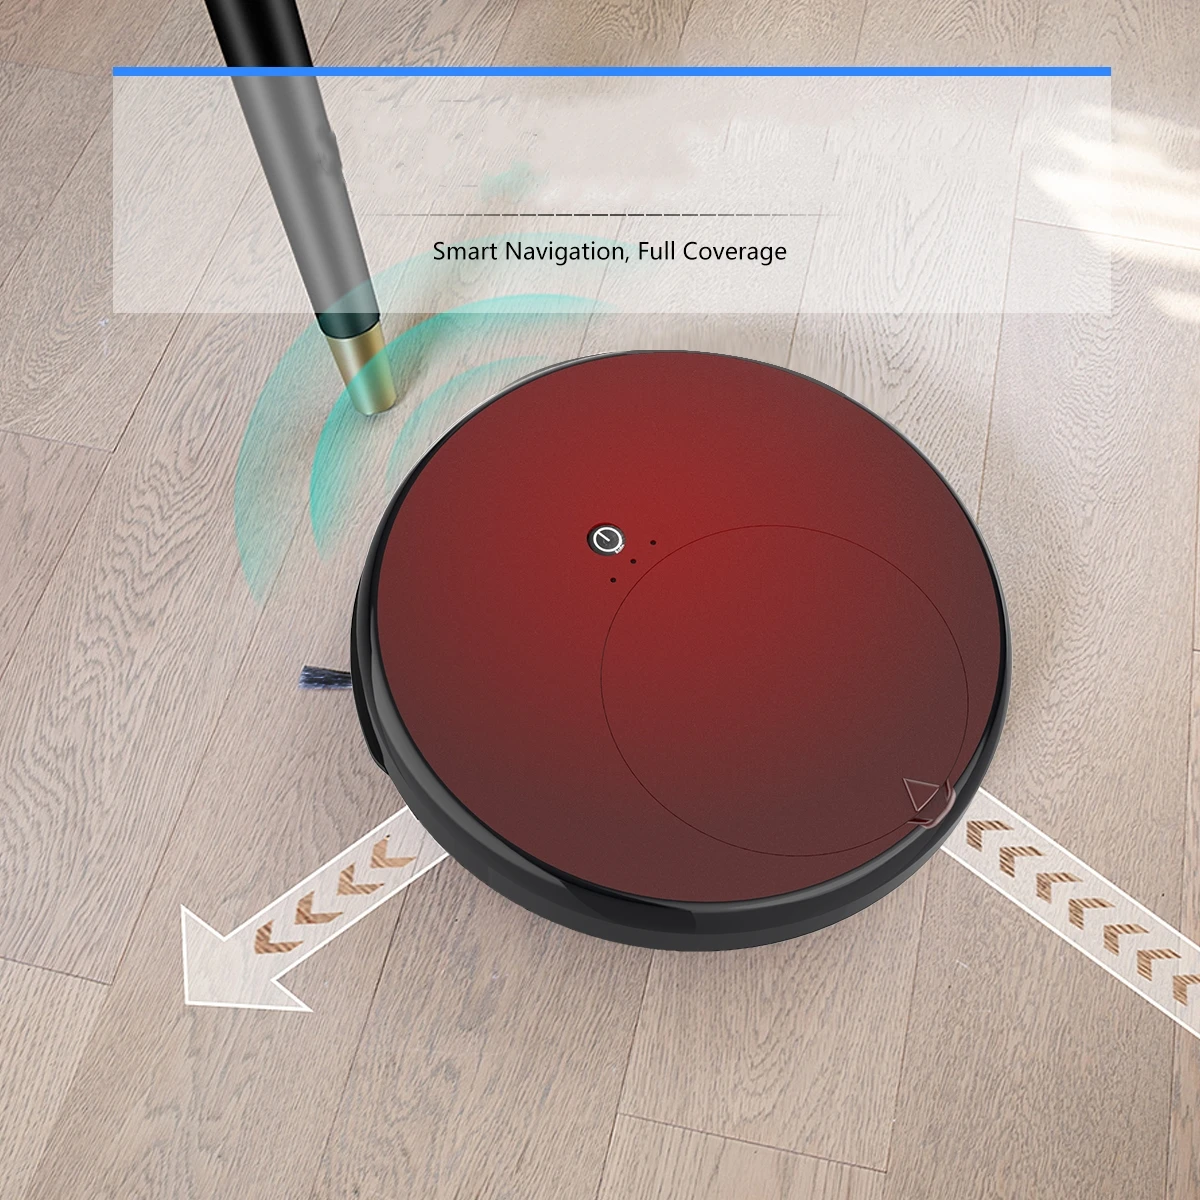 APP controls the infrared remote controller automatically recharging the sweeping robot with gyroscope path planning